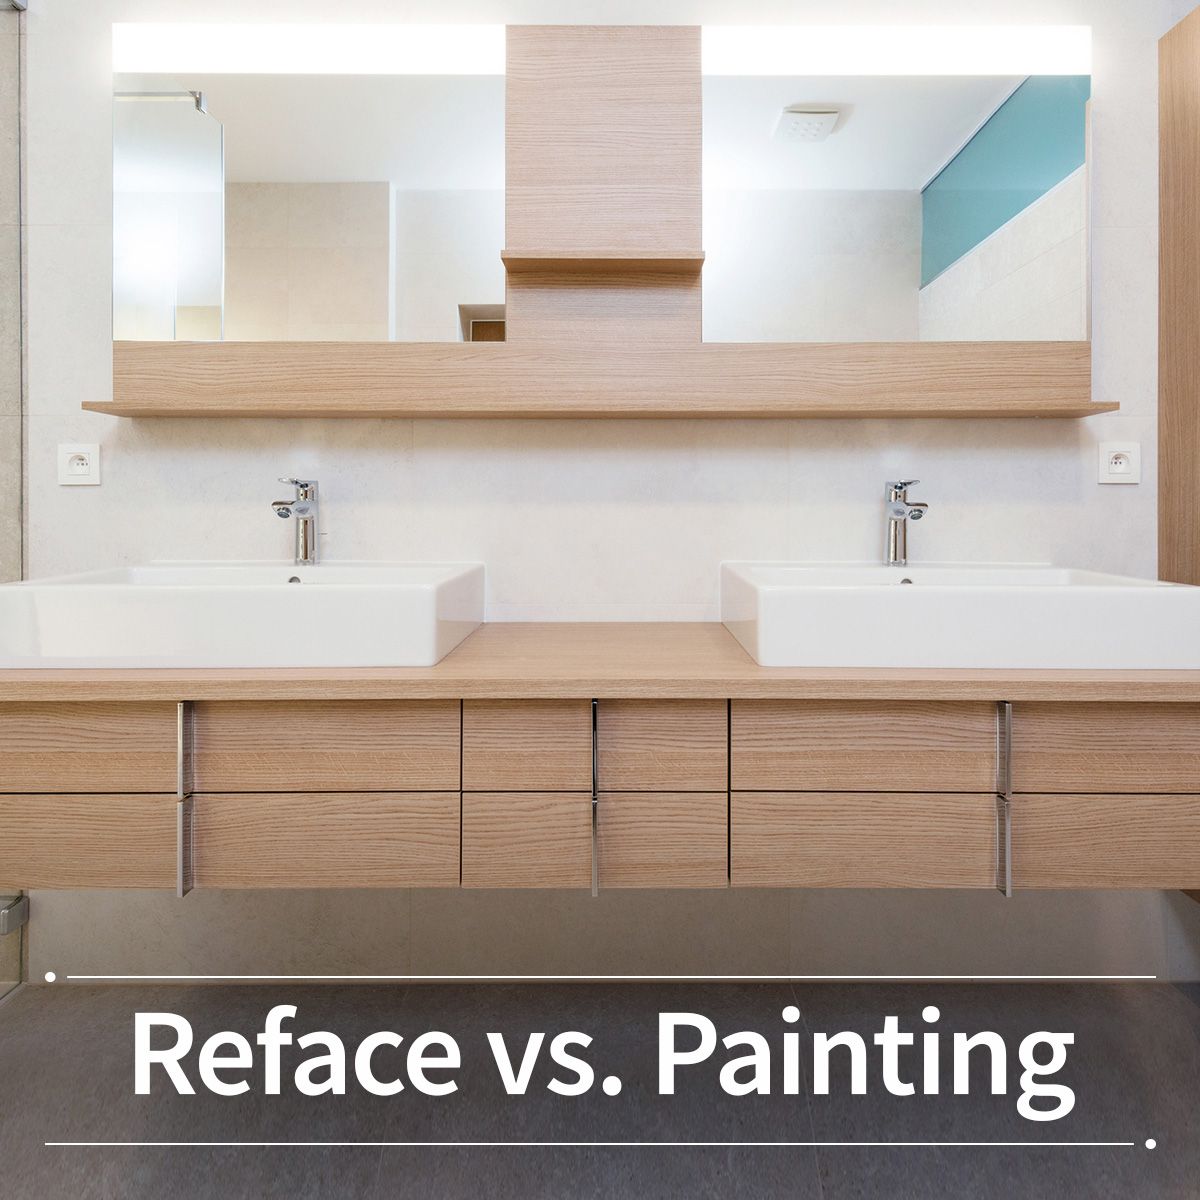 Reface vs. Painting